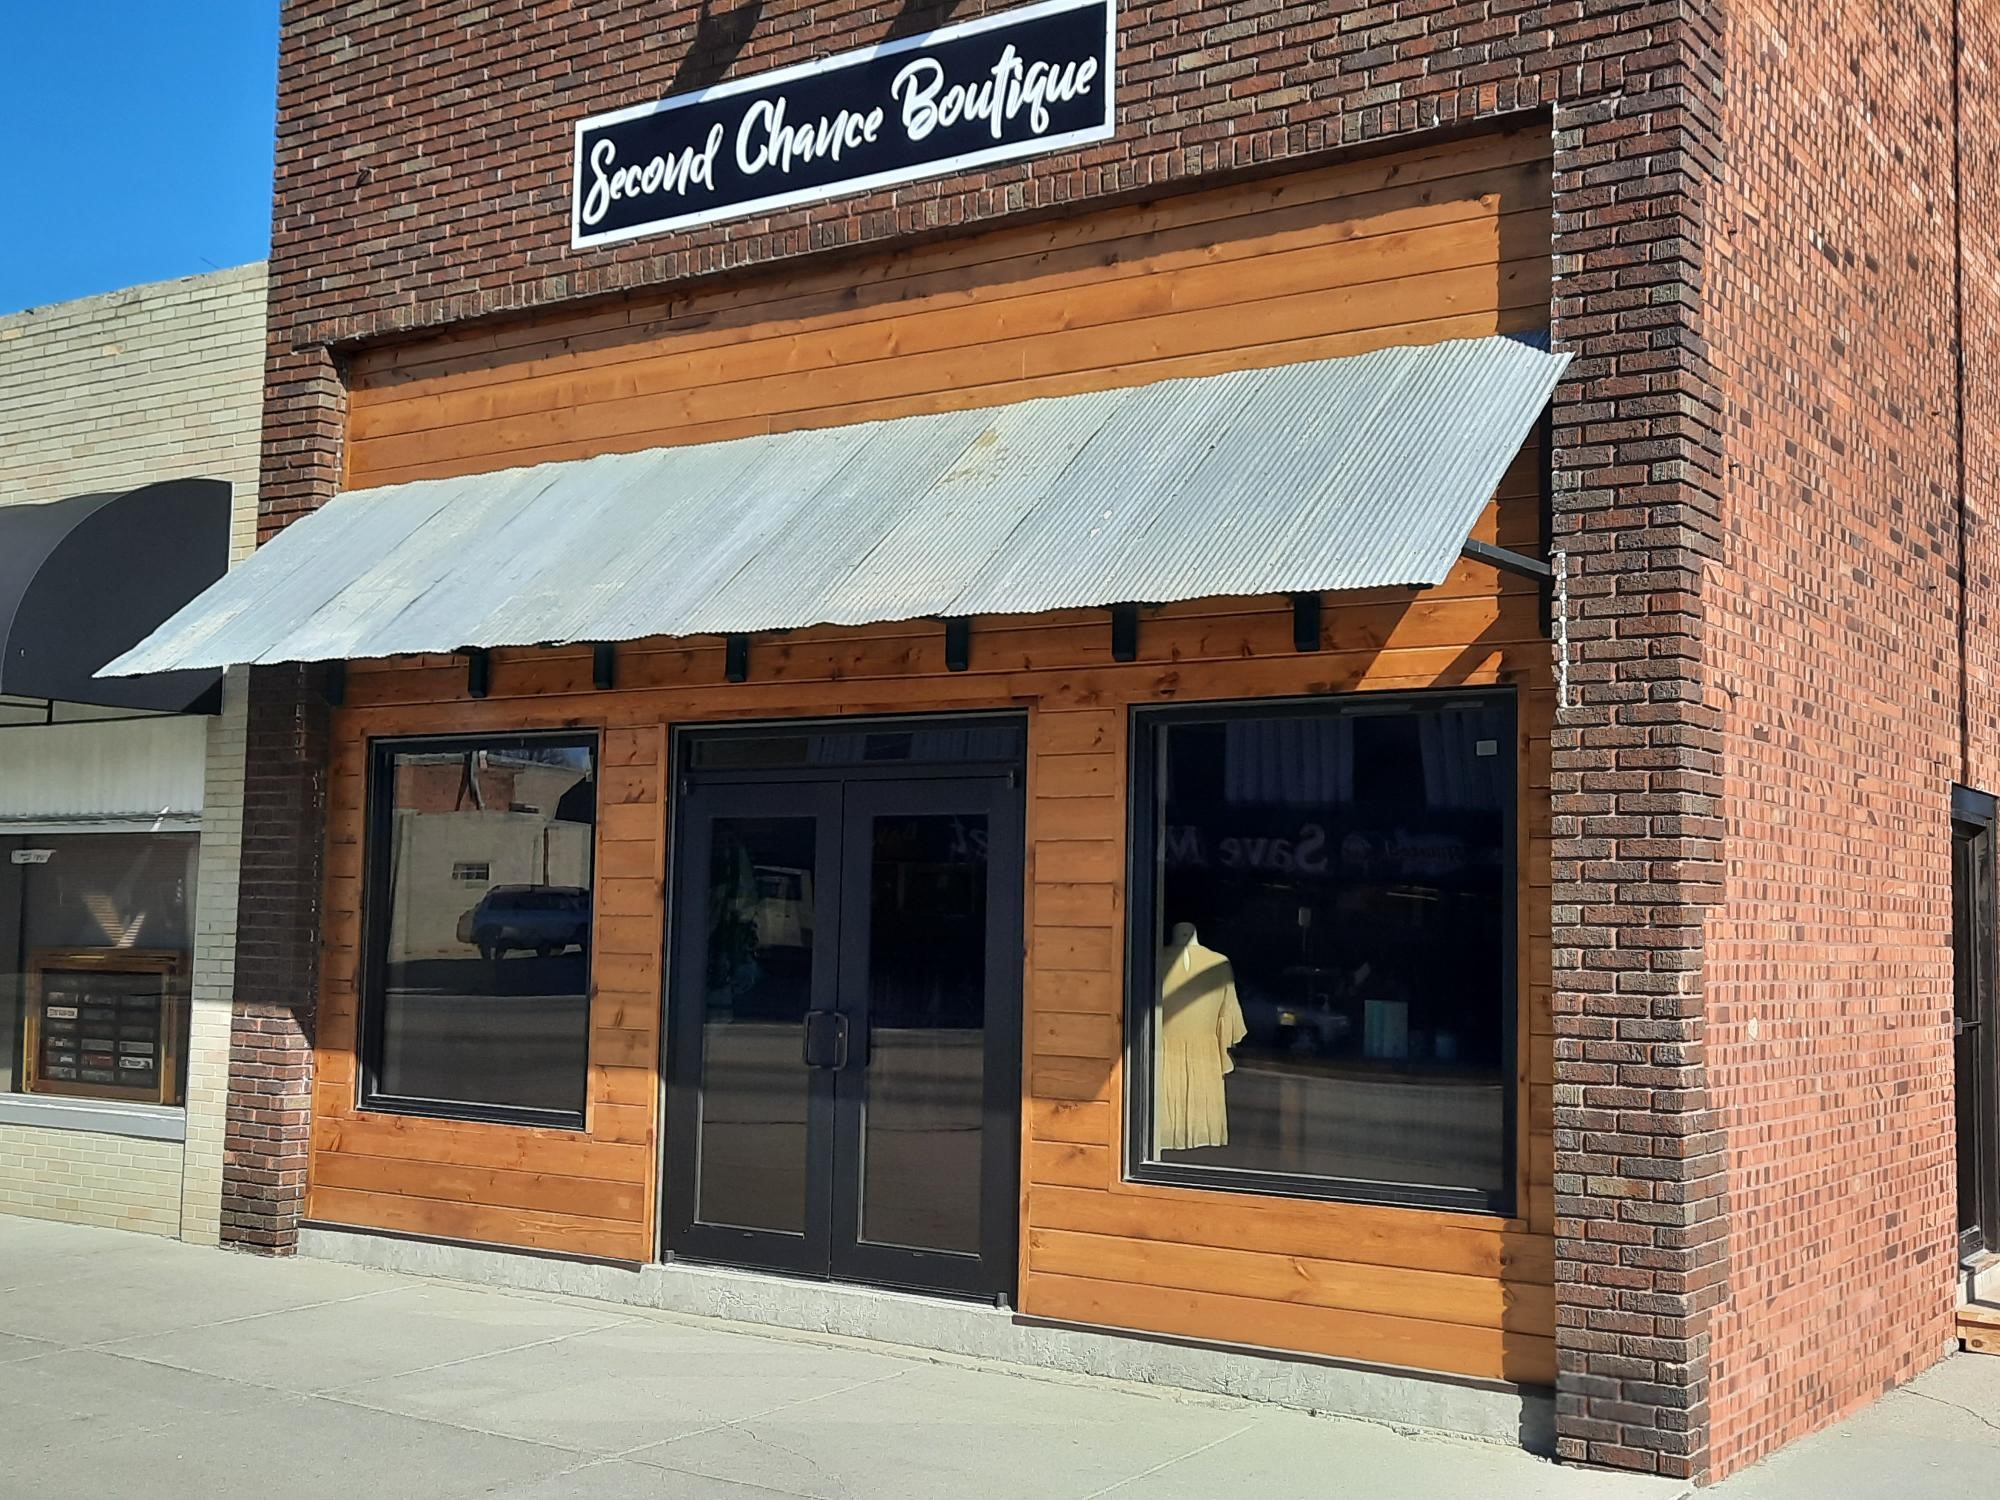 Second Chance Boutique Brings More New Life to Tekamah Main Street